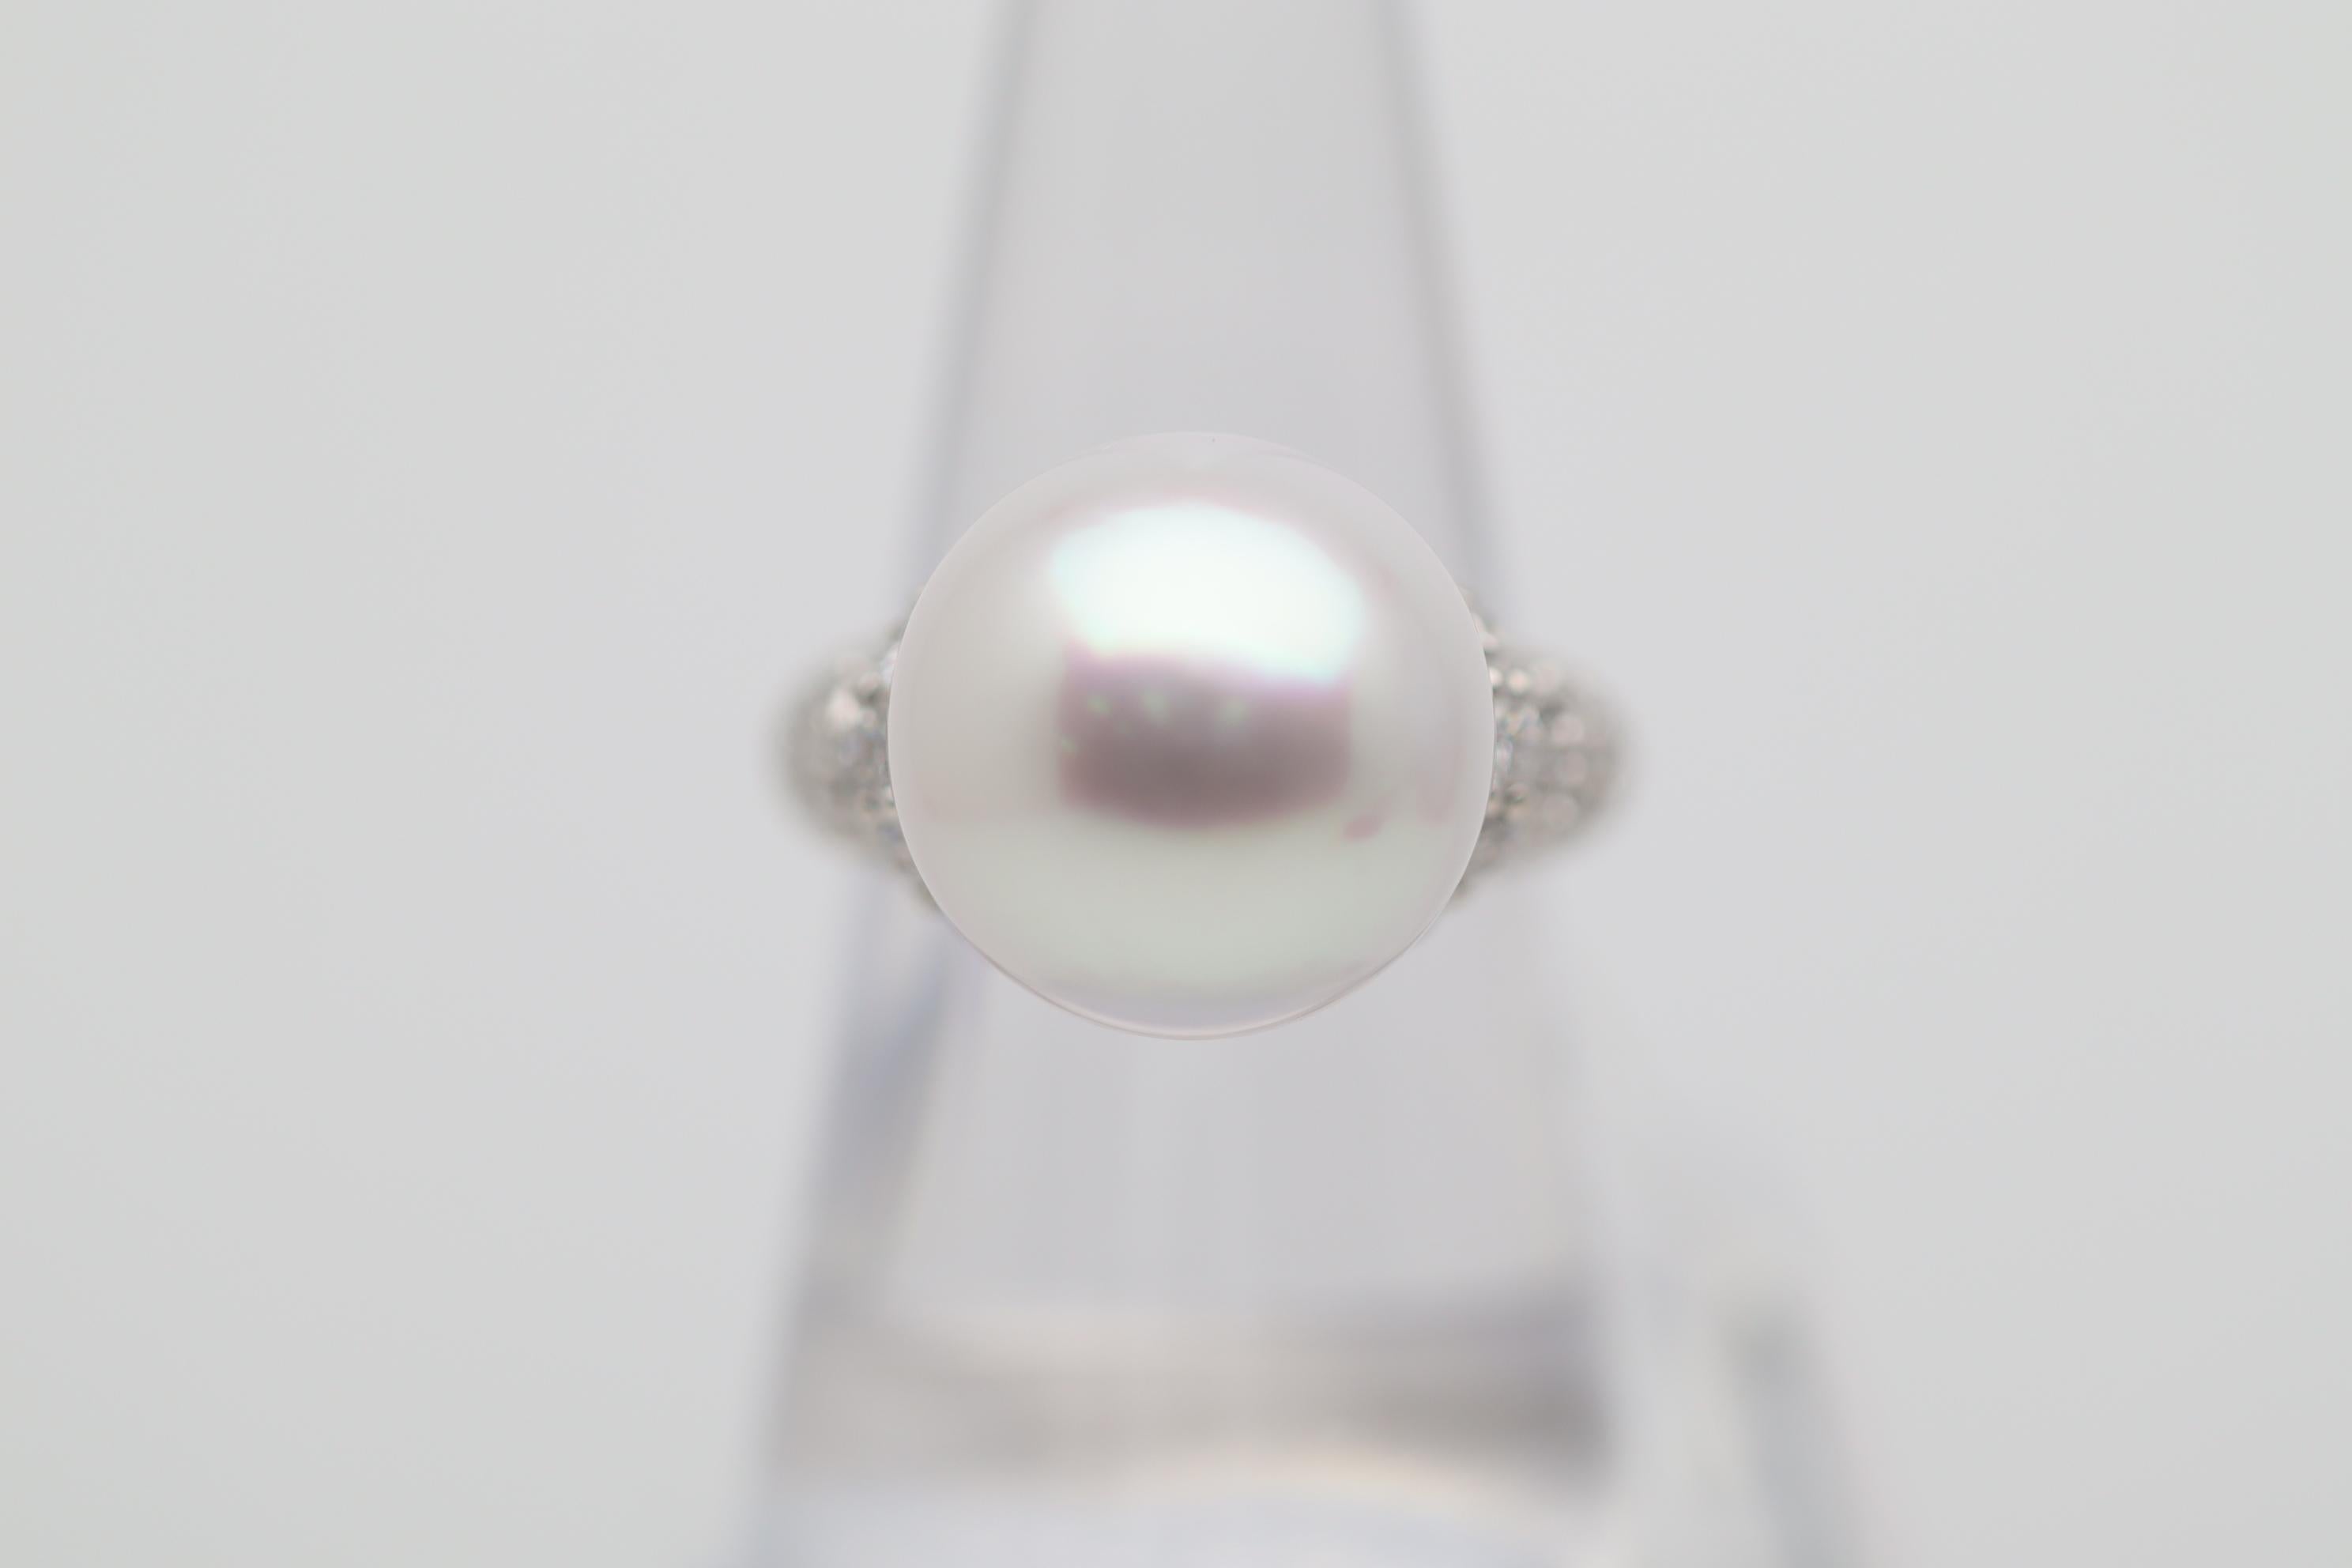 A lovely ring featuring a very fine south sea cultured pearl. The pearl measures a very impressive 15mm while having excellent luster and a strong and bright pink overtone that makes the pearl appear to glow. It is complemented by 0.80 carats of